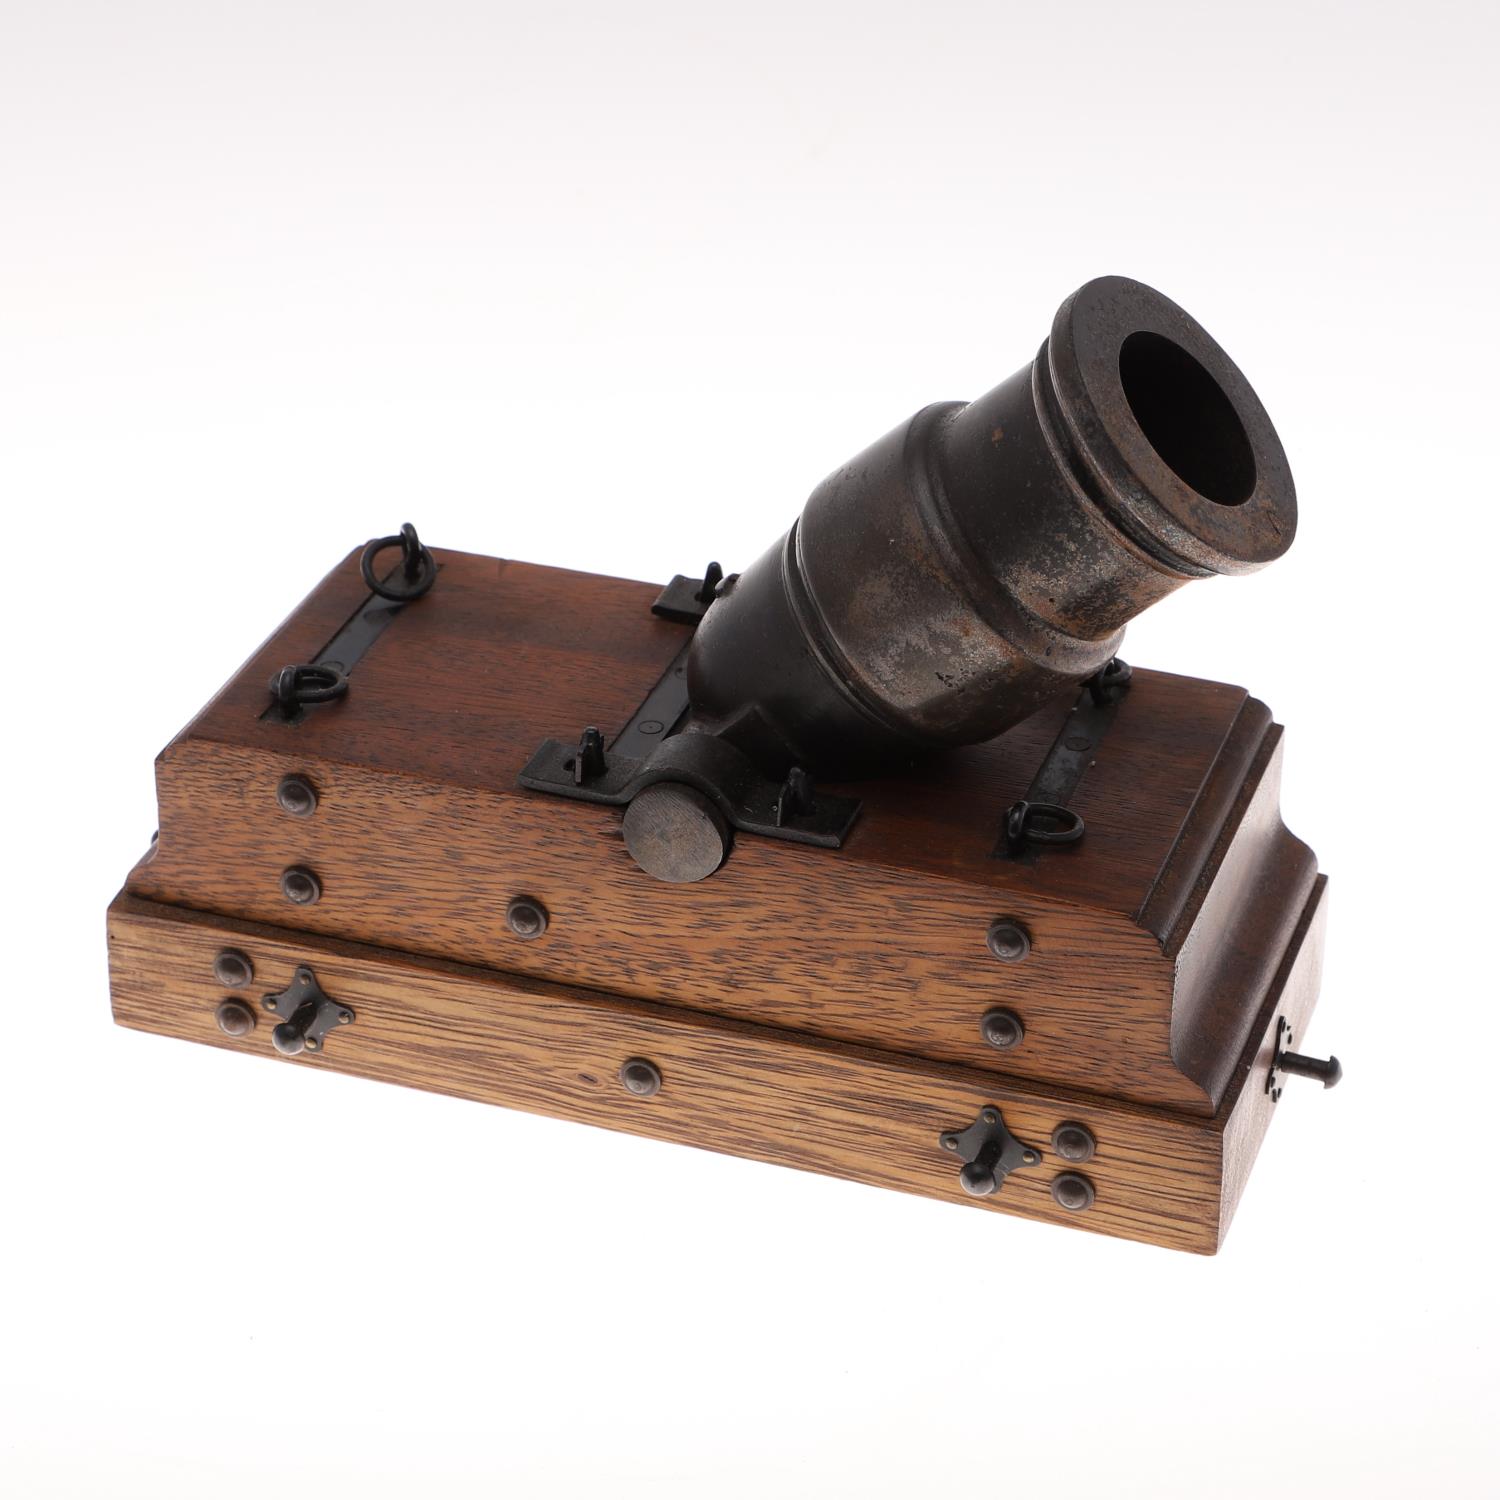 A MODEL OF A 19TH CENTURY TEN OR THIRTEEN INCH MORTAR ON WOODEN BED.